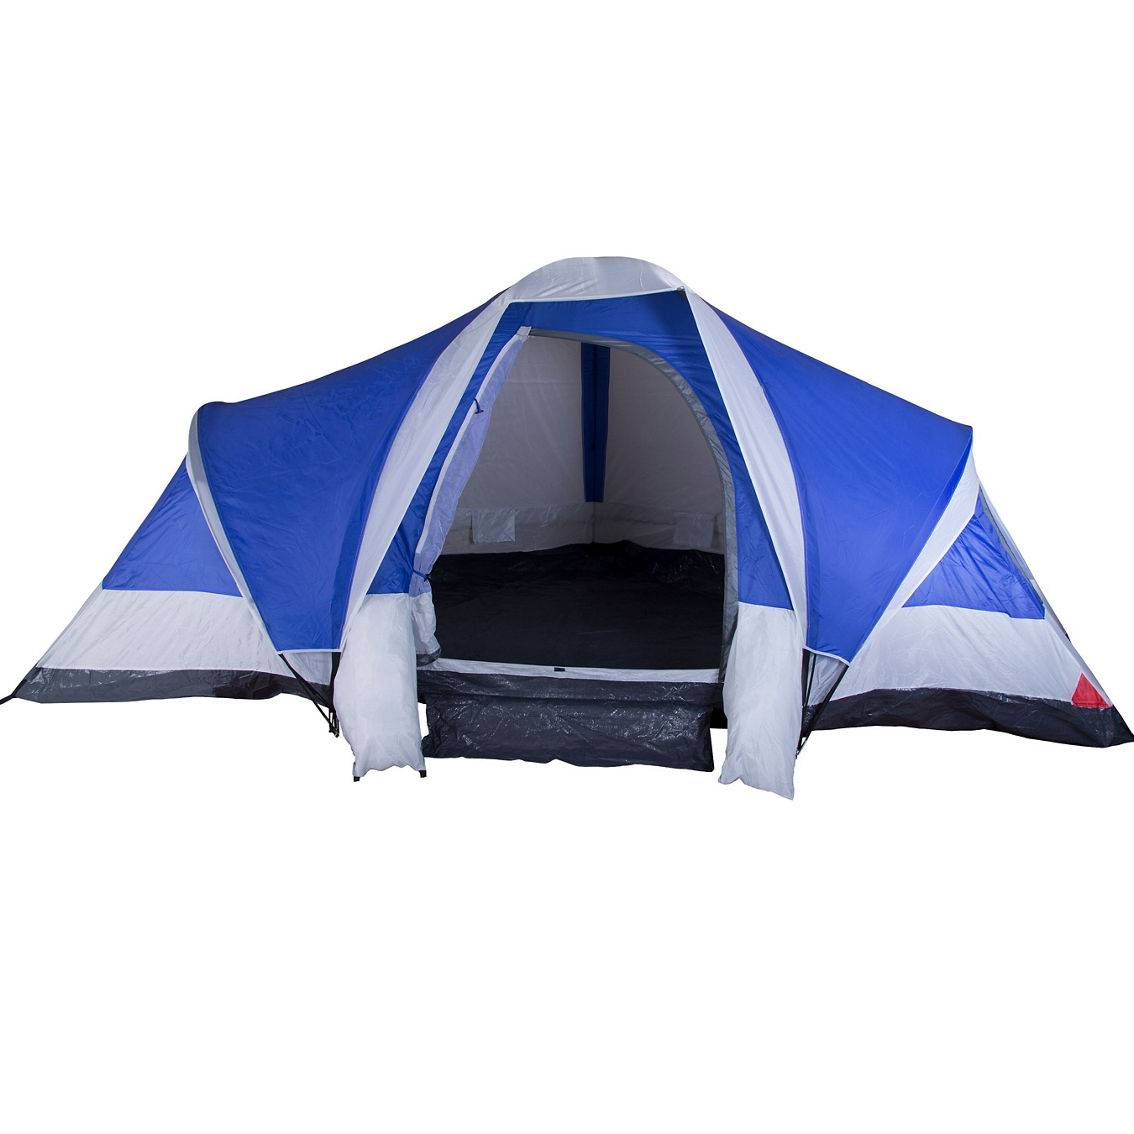 Stansport Grand 18 3-Room Family Tent - Image 2 of 5